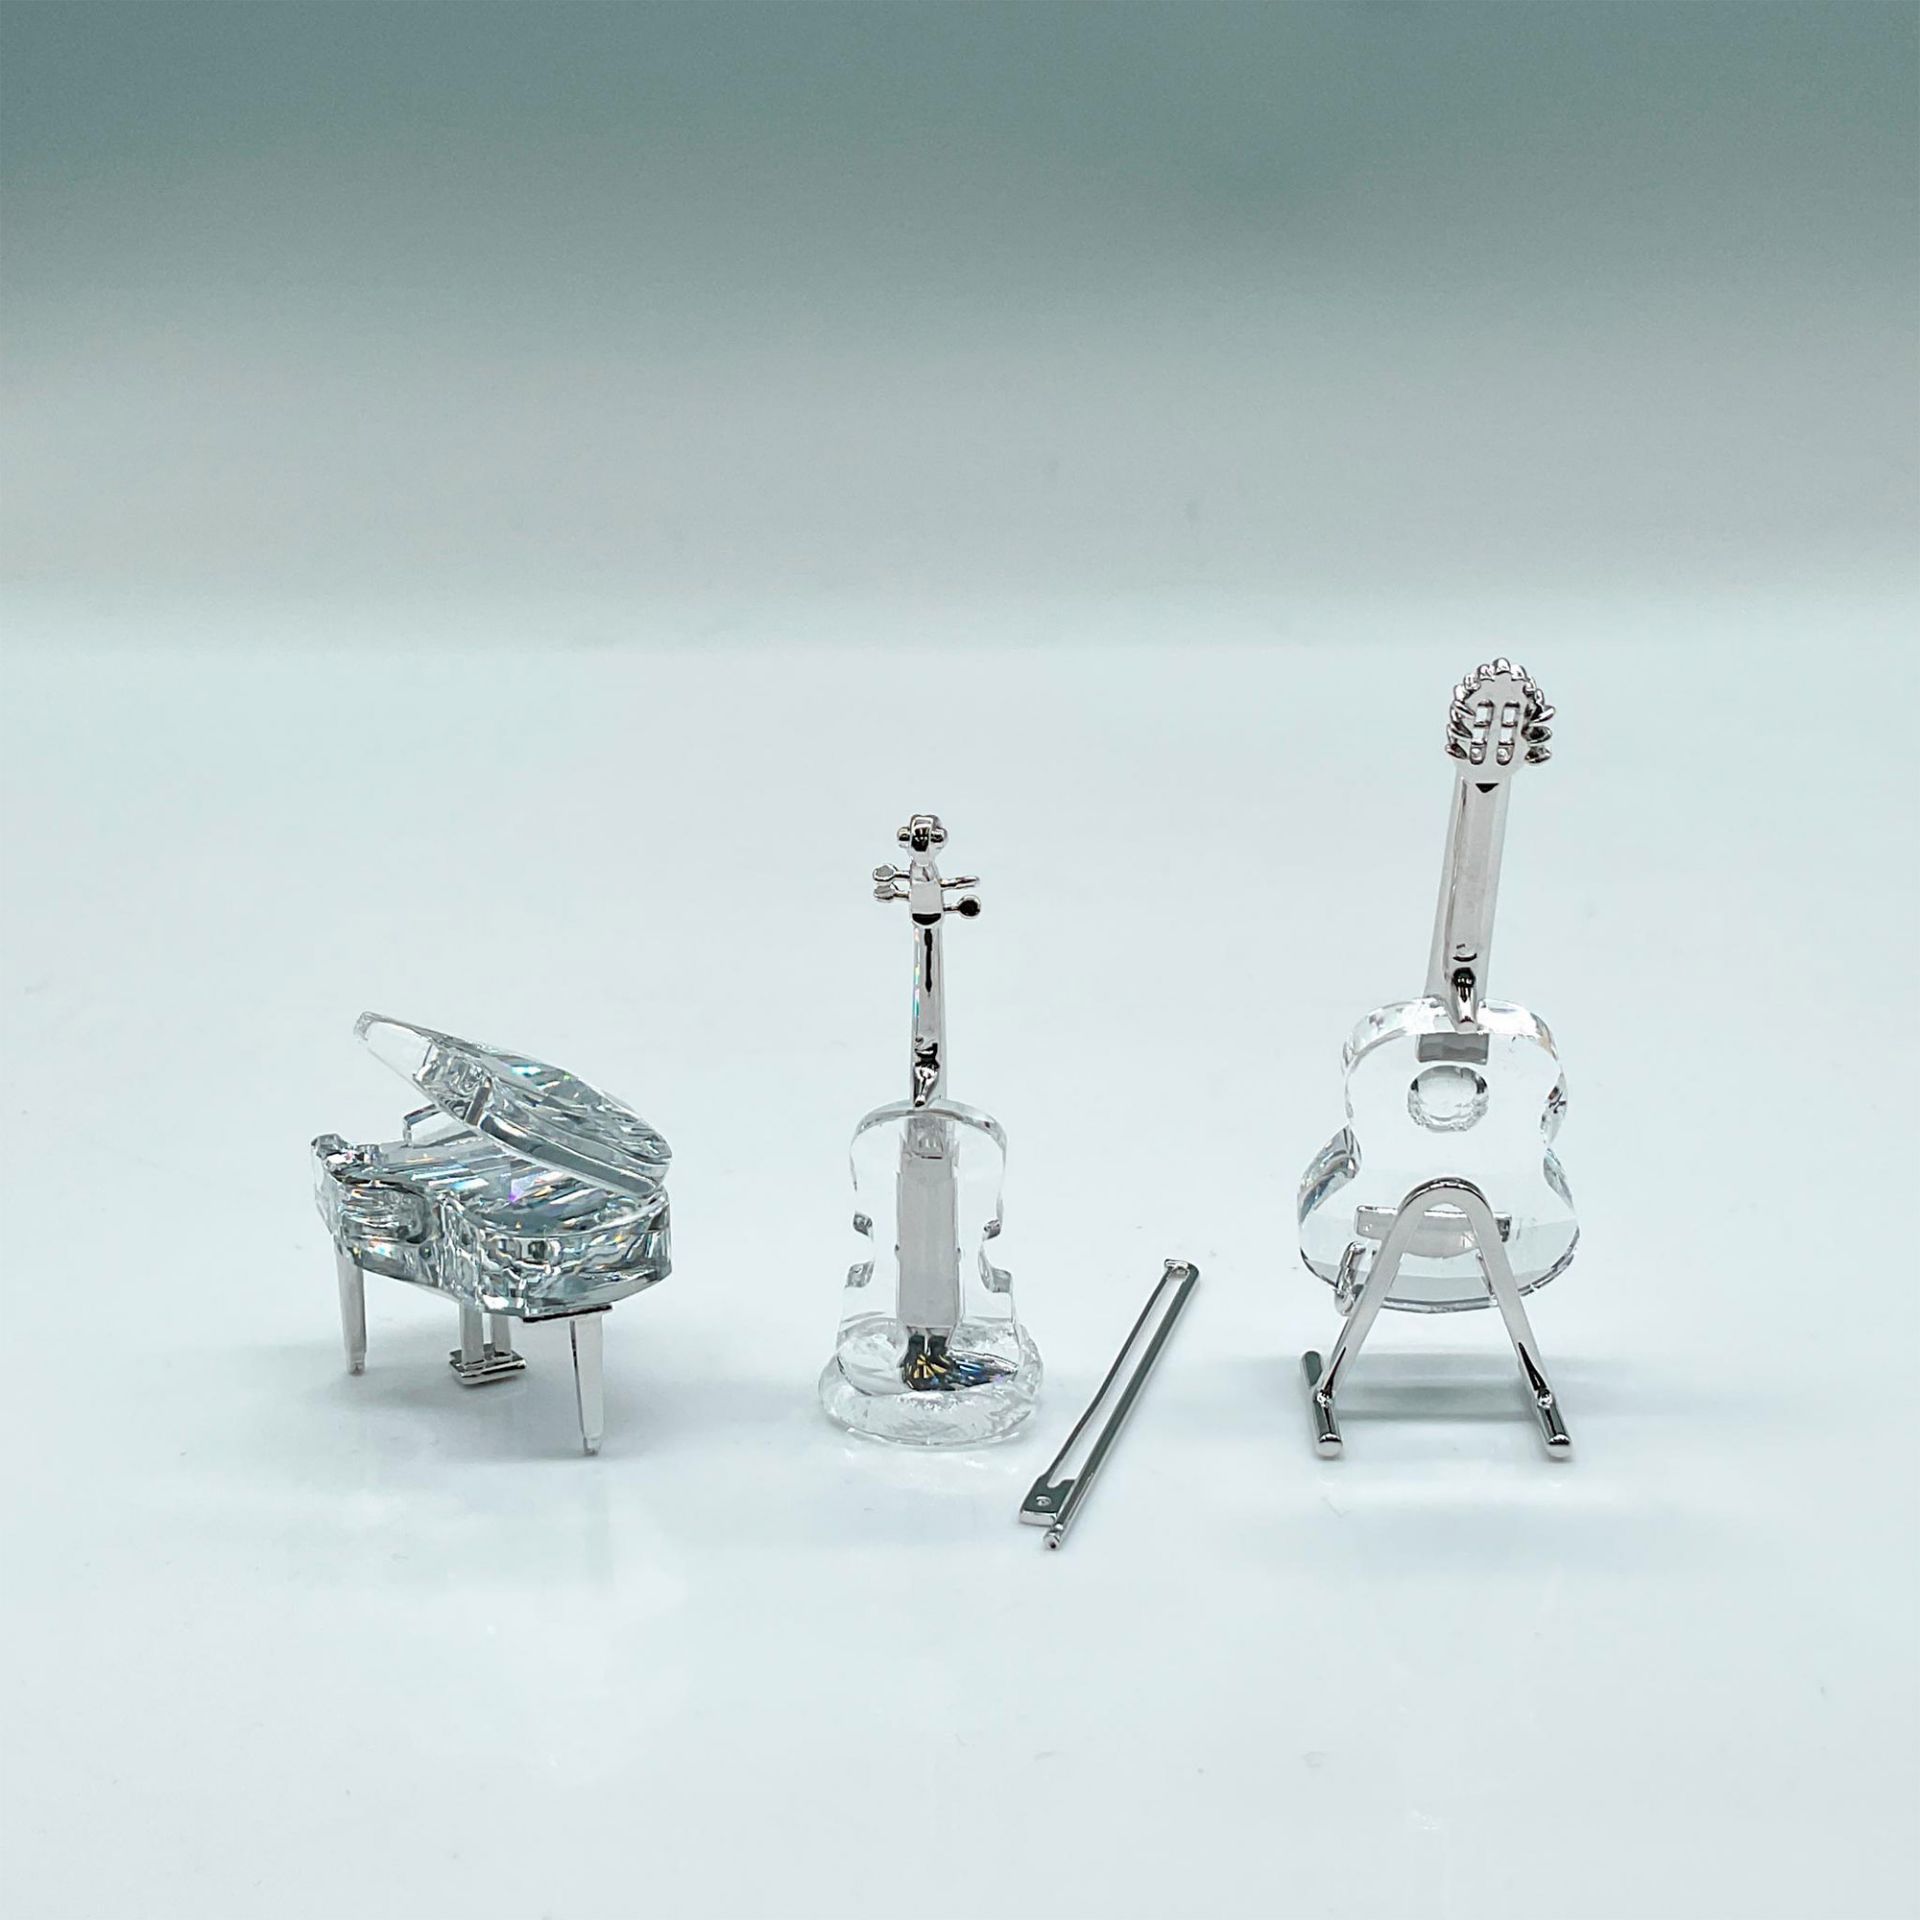 4pc Swarovski Crystal Figurines, Musical Instruments + Pin - Image 3 of 6